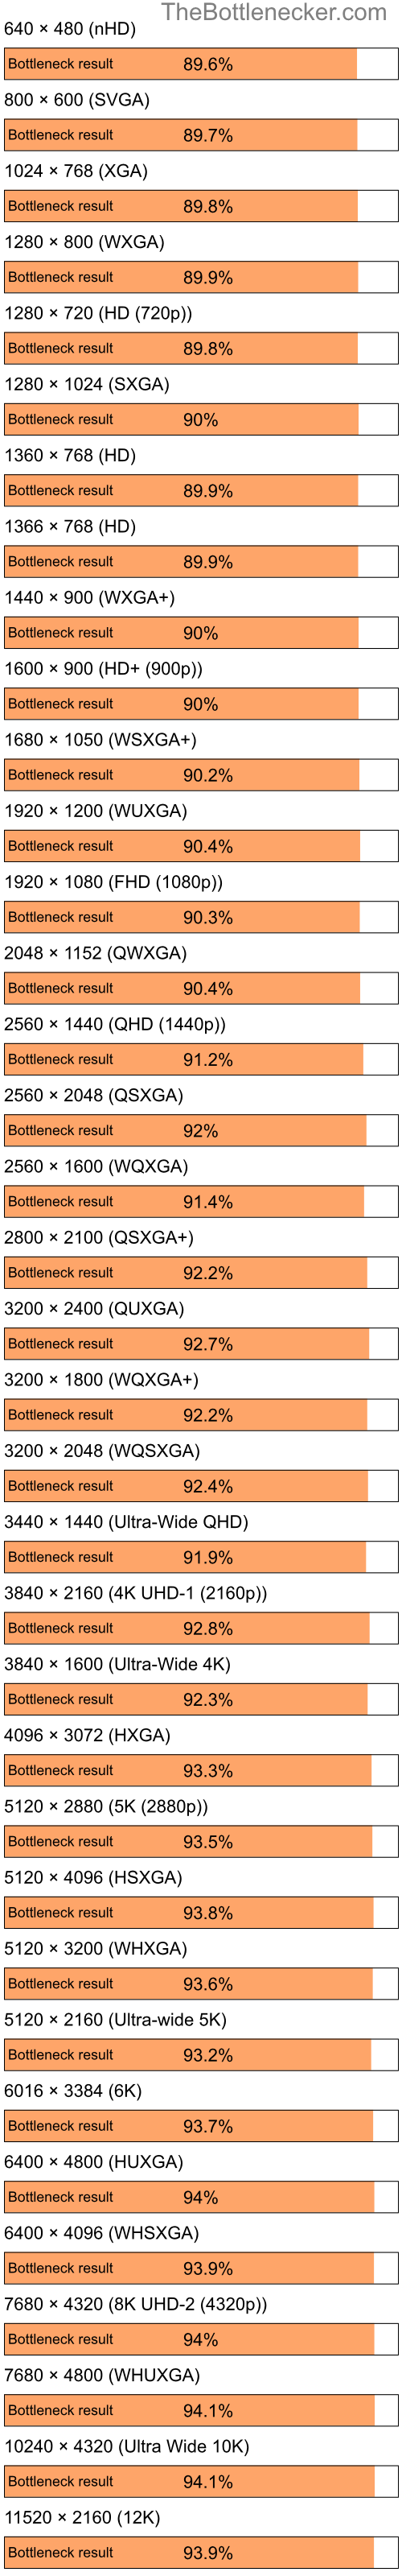 Bottleneck results by resolution for Intel Atom N280 and AMD Mobility Radeon 9200 in Processor Intense Tasks